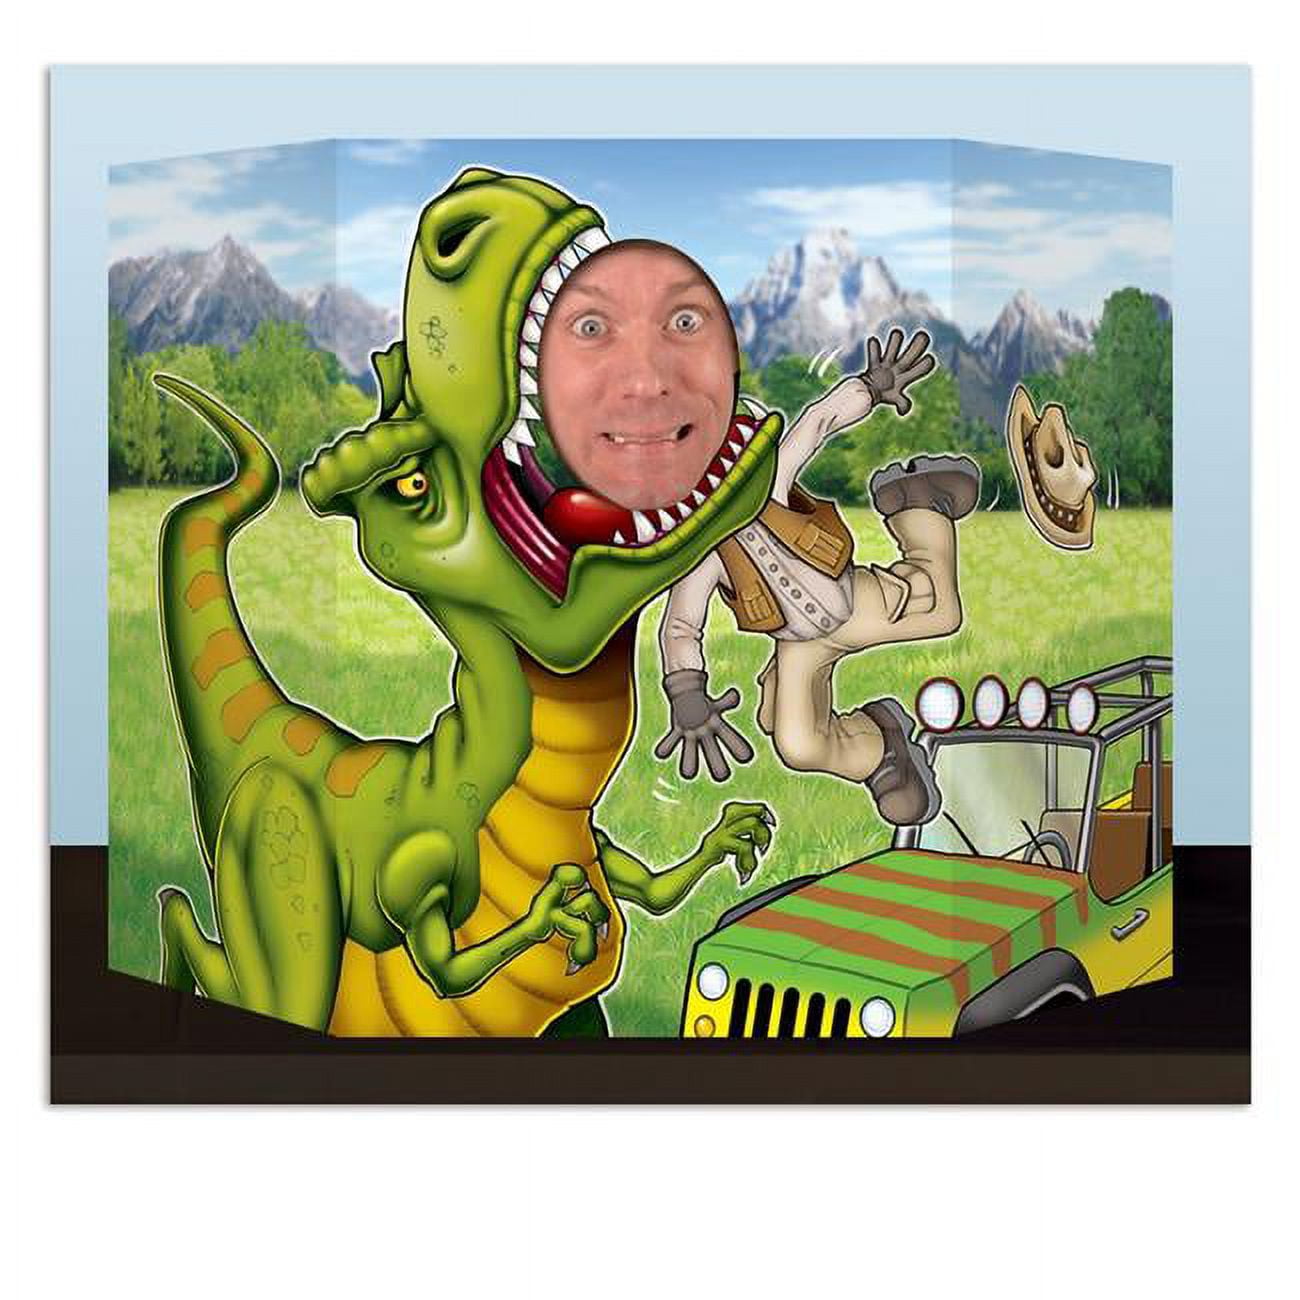 Picture of Beistle 59642 3 ft. 1 in. x 25 in. Dinosaur Photo Prop - Pack of 6